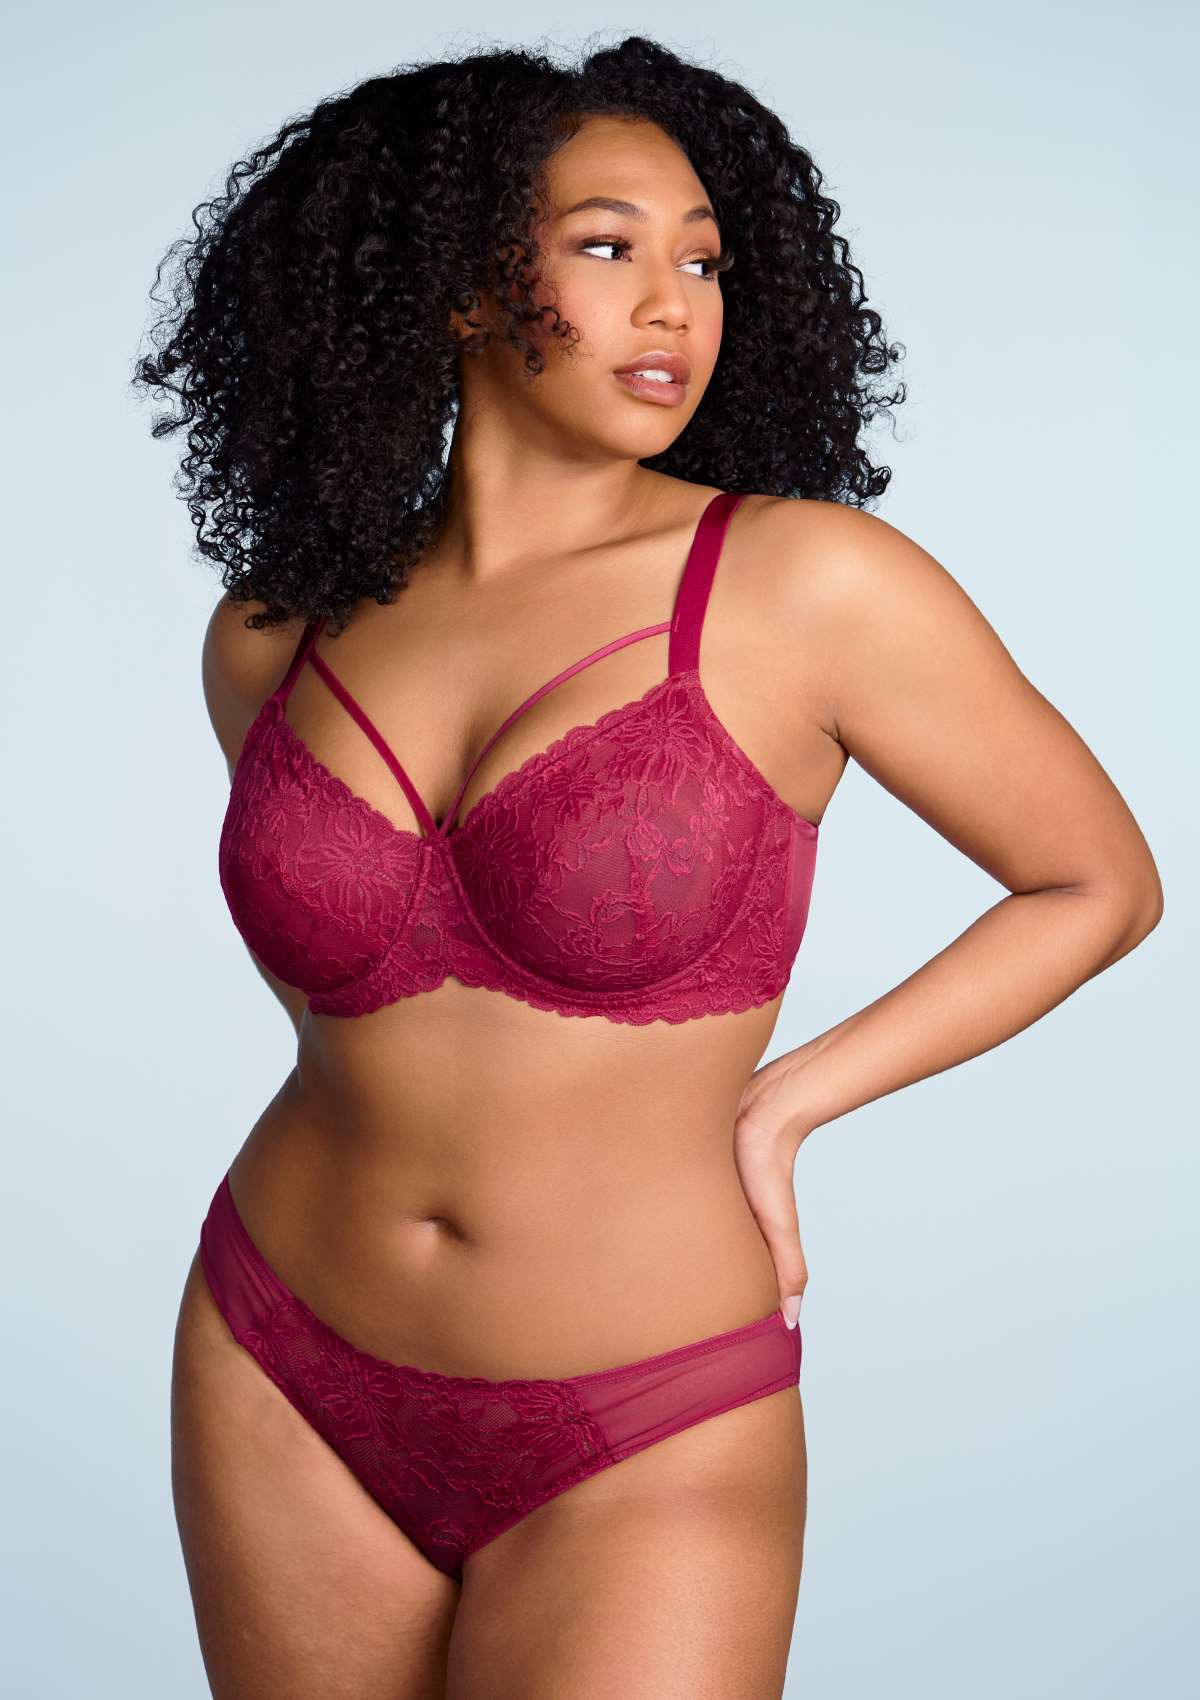 HSIA Pretty In Petals Lace Panties And Bra Set: Plus Size Women Bra - Red / 42 / G